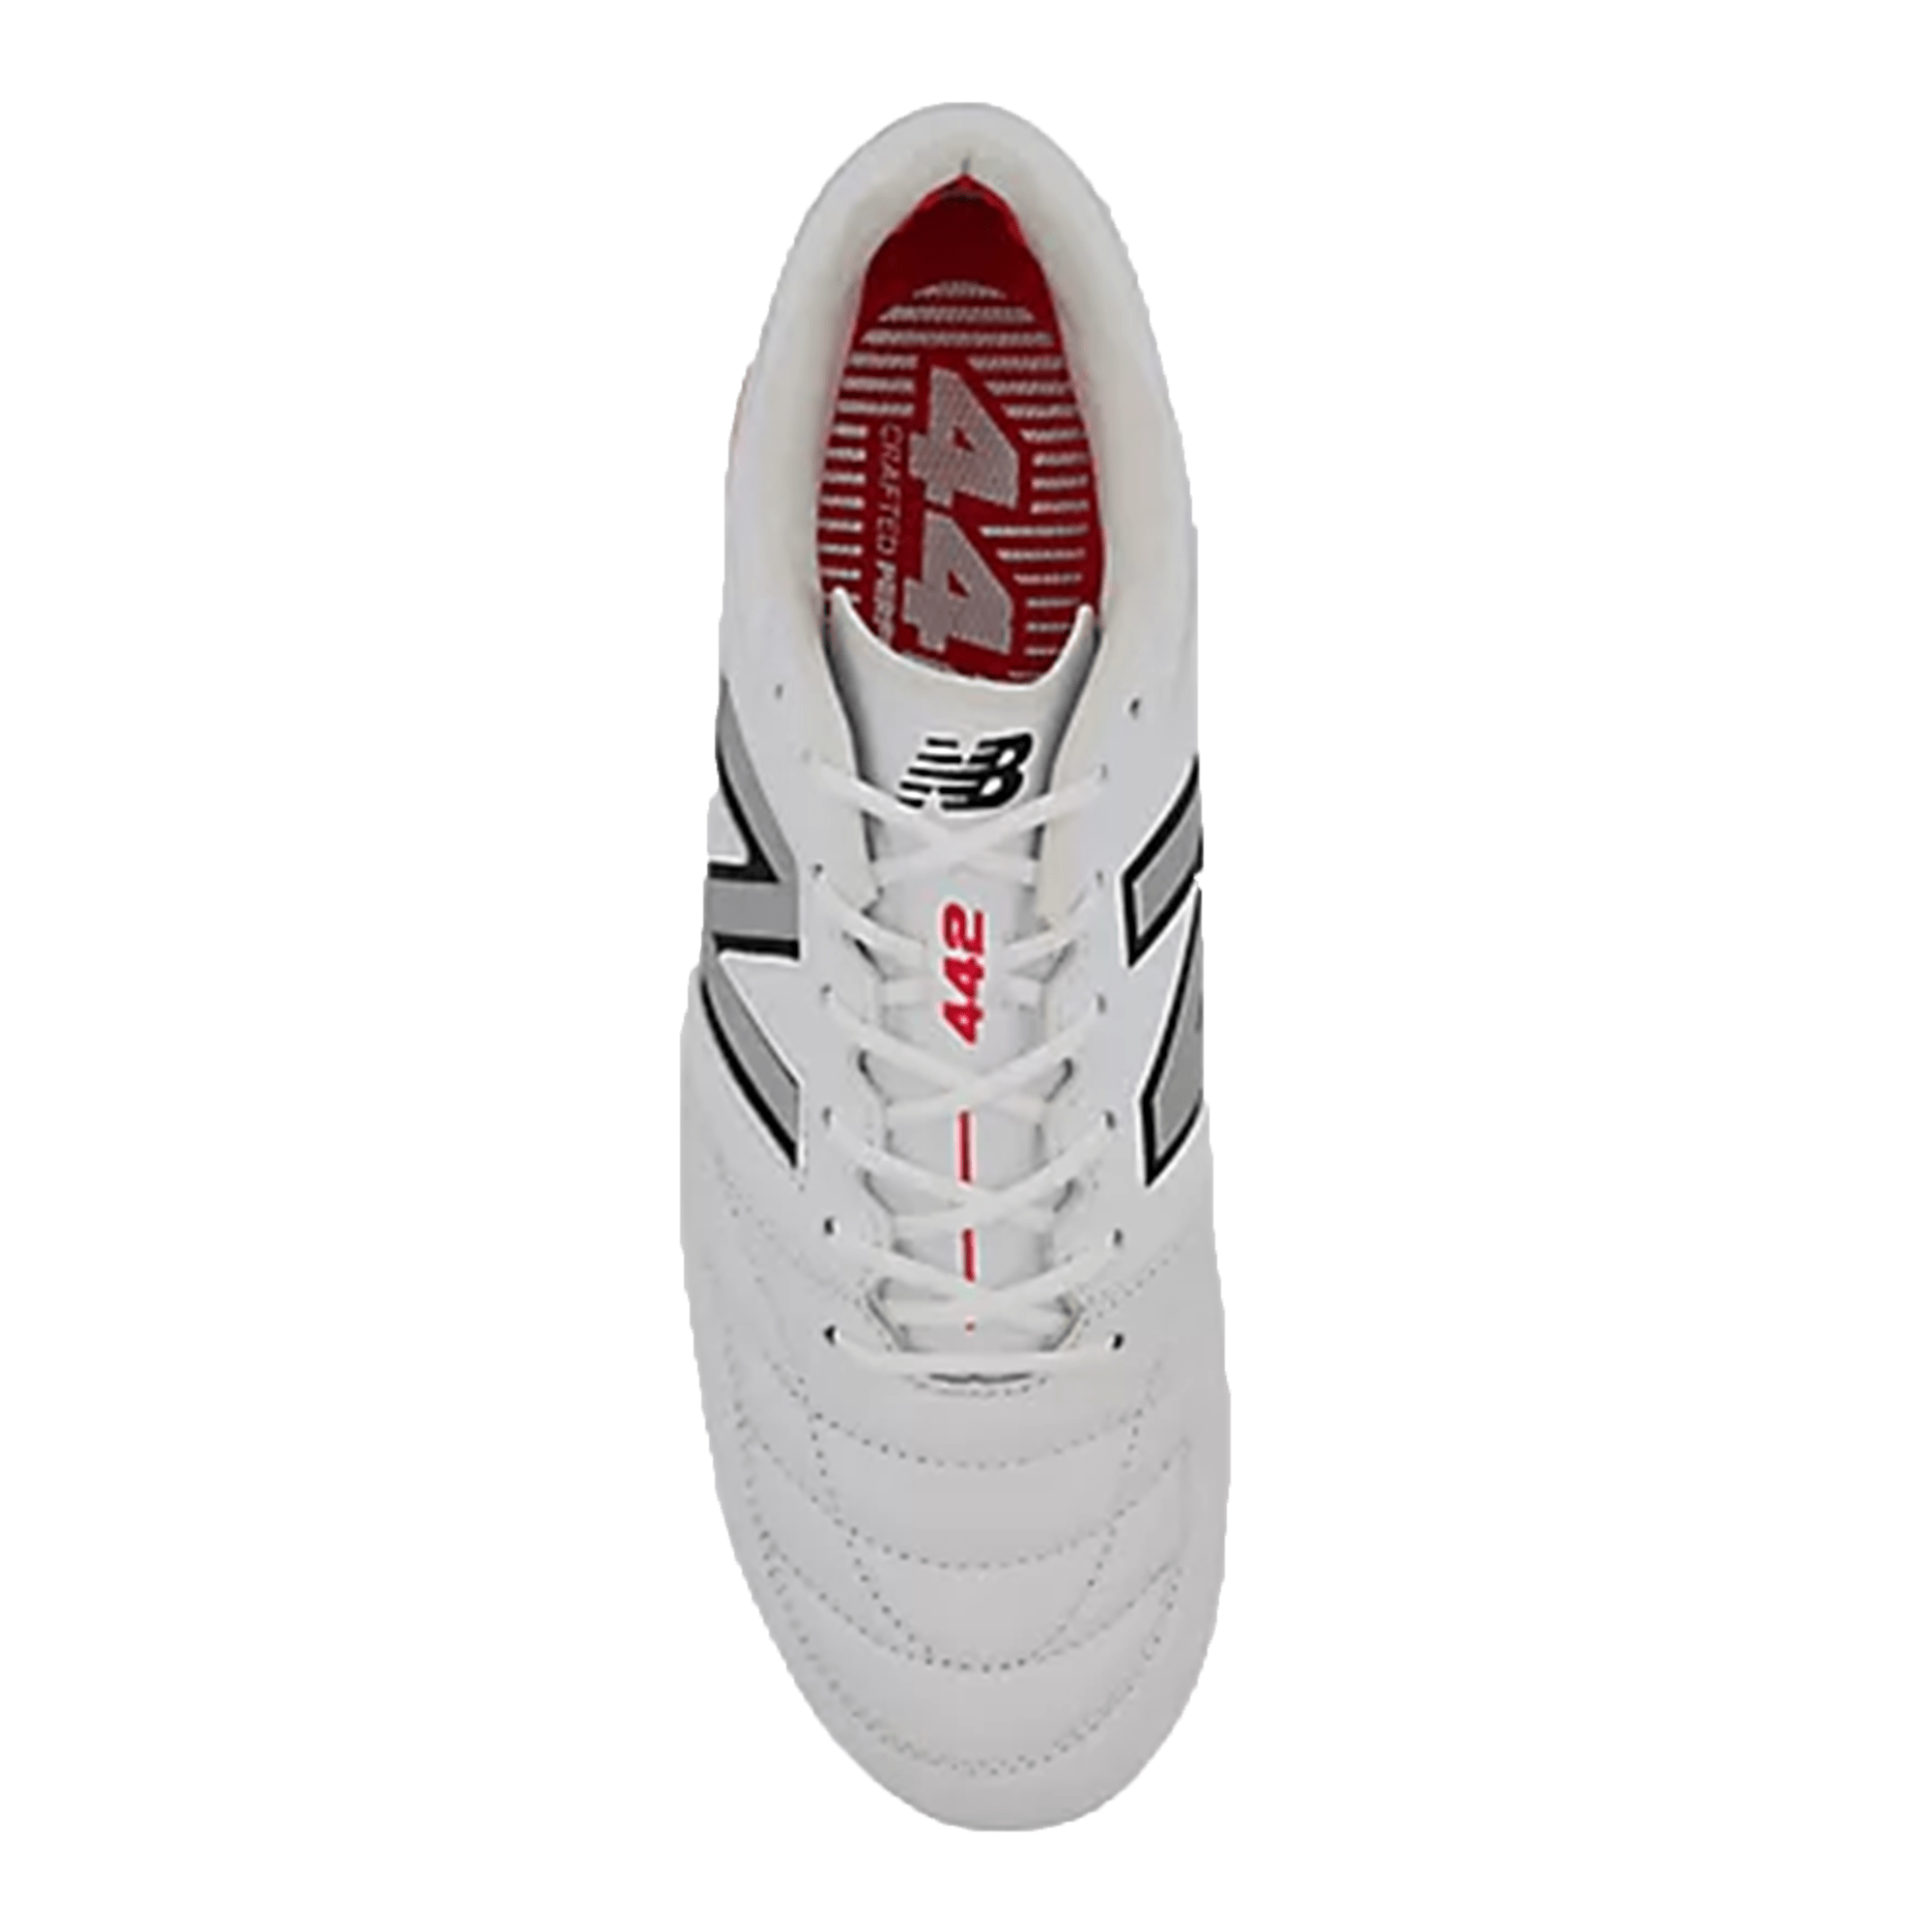 New Balance 442 V2 Pro Wide Rugby Cleat - Firm Ground Boots